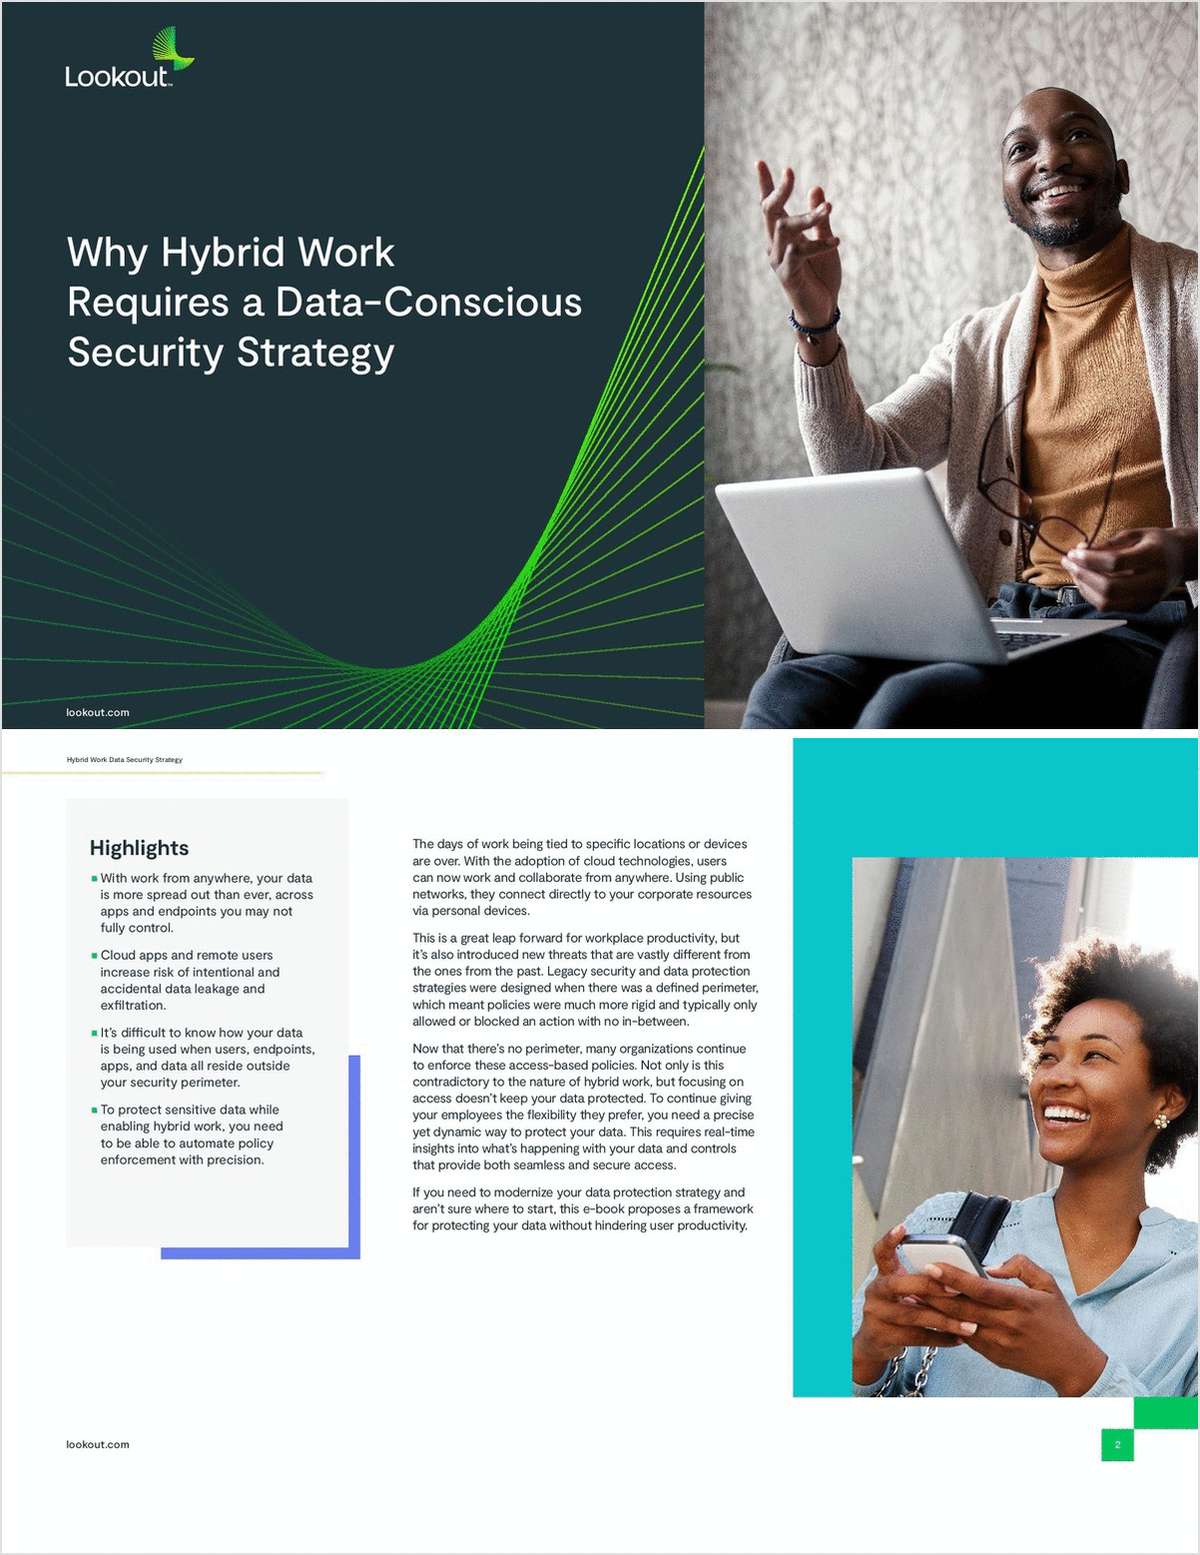 Why Hybrid Work Requires a Data-Conscious Security Strategy